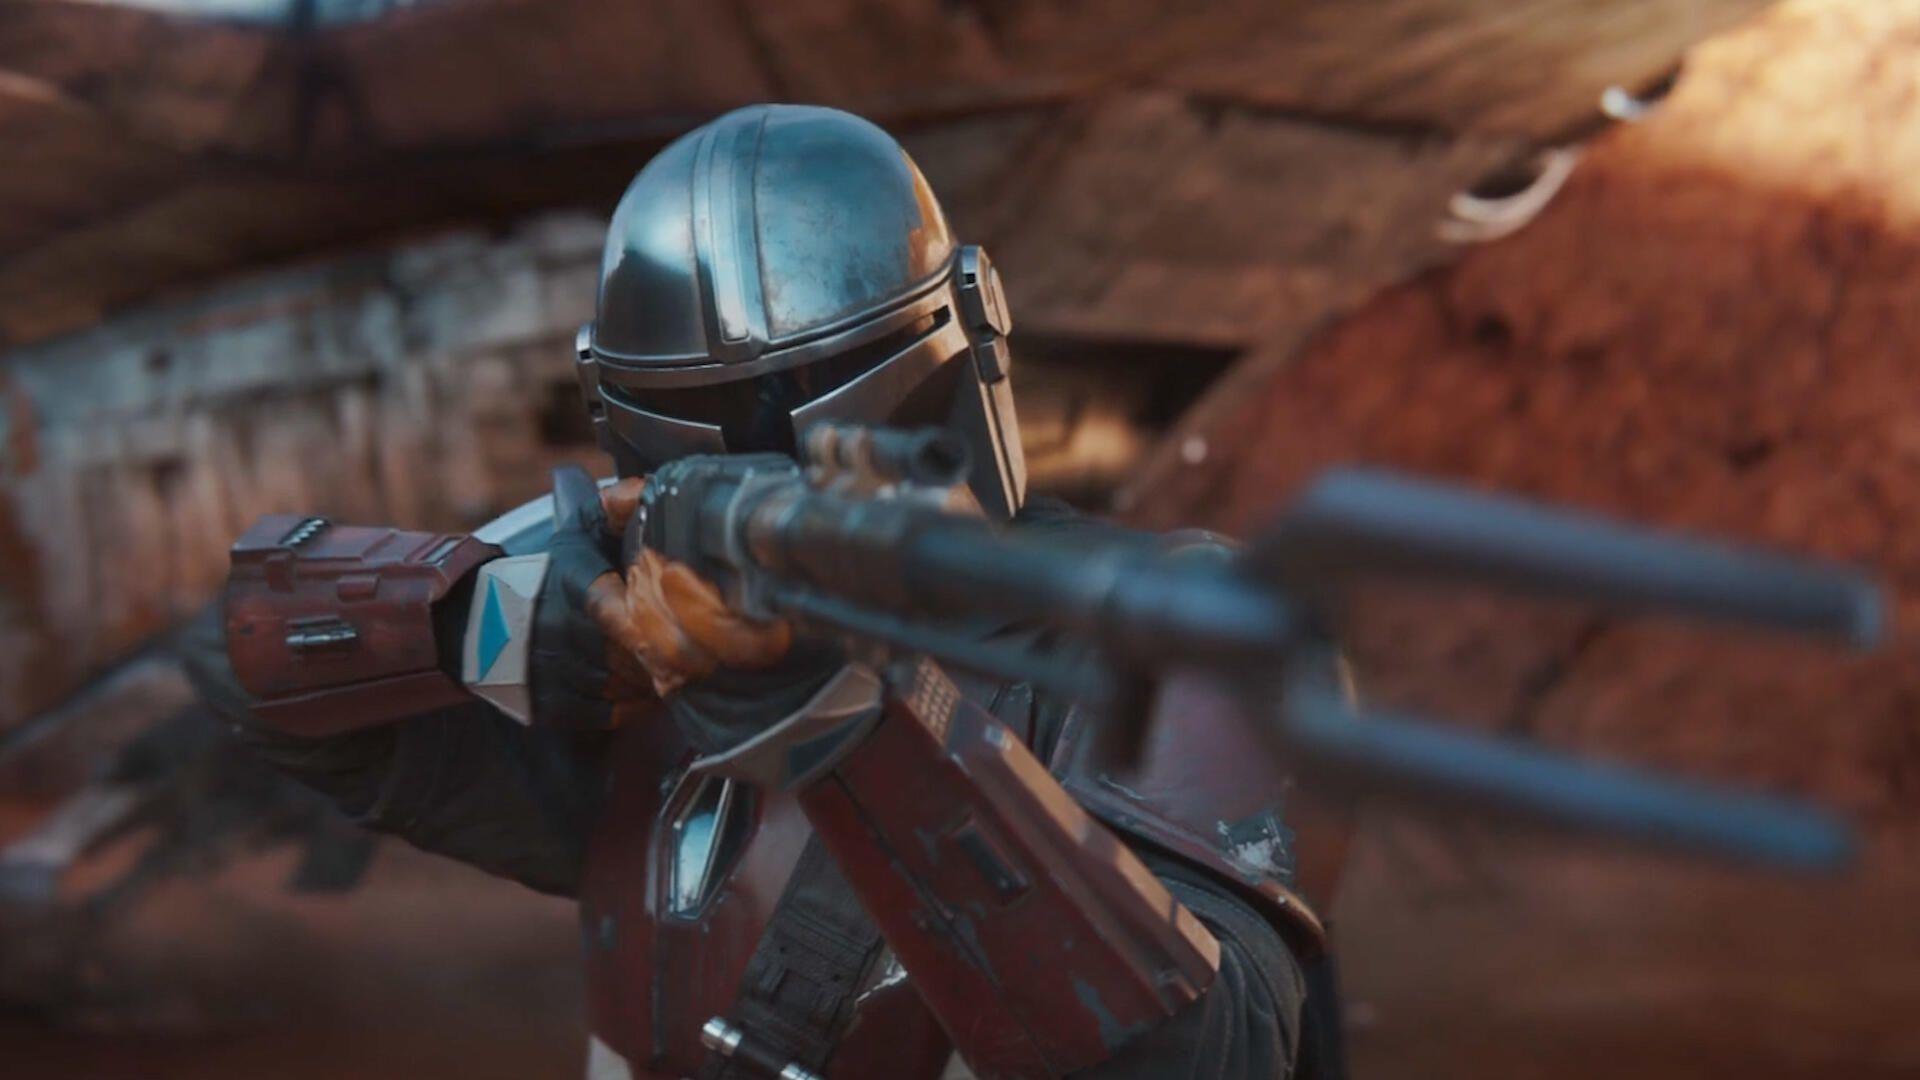 The Mandalorian: Everything we know about the new Star Wars